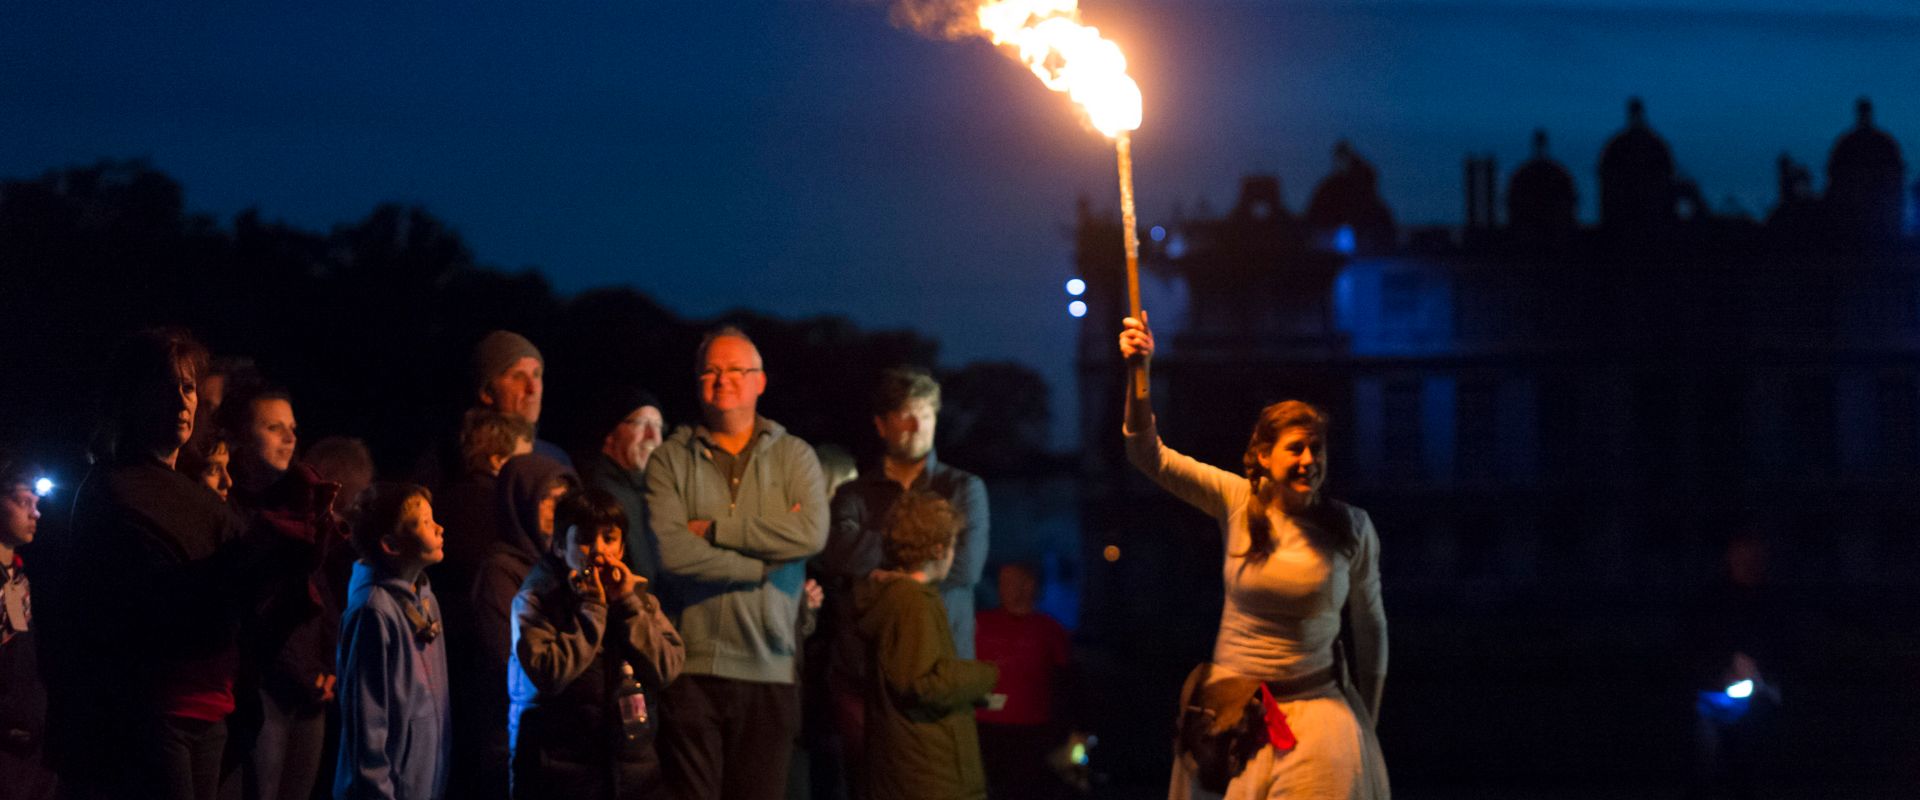 Red Riding Hood, protecting the audience, holds above her head a flaming torch.